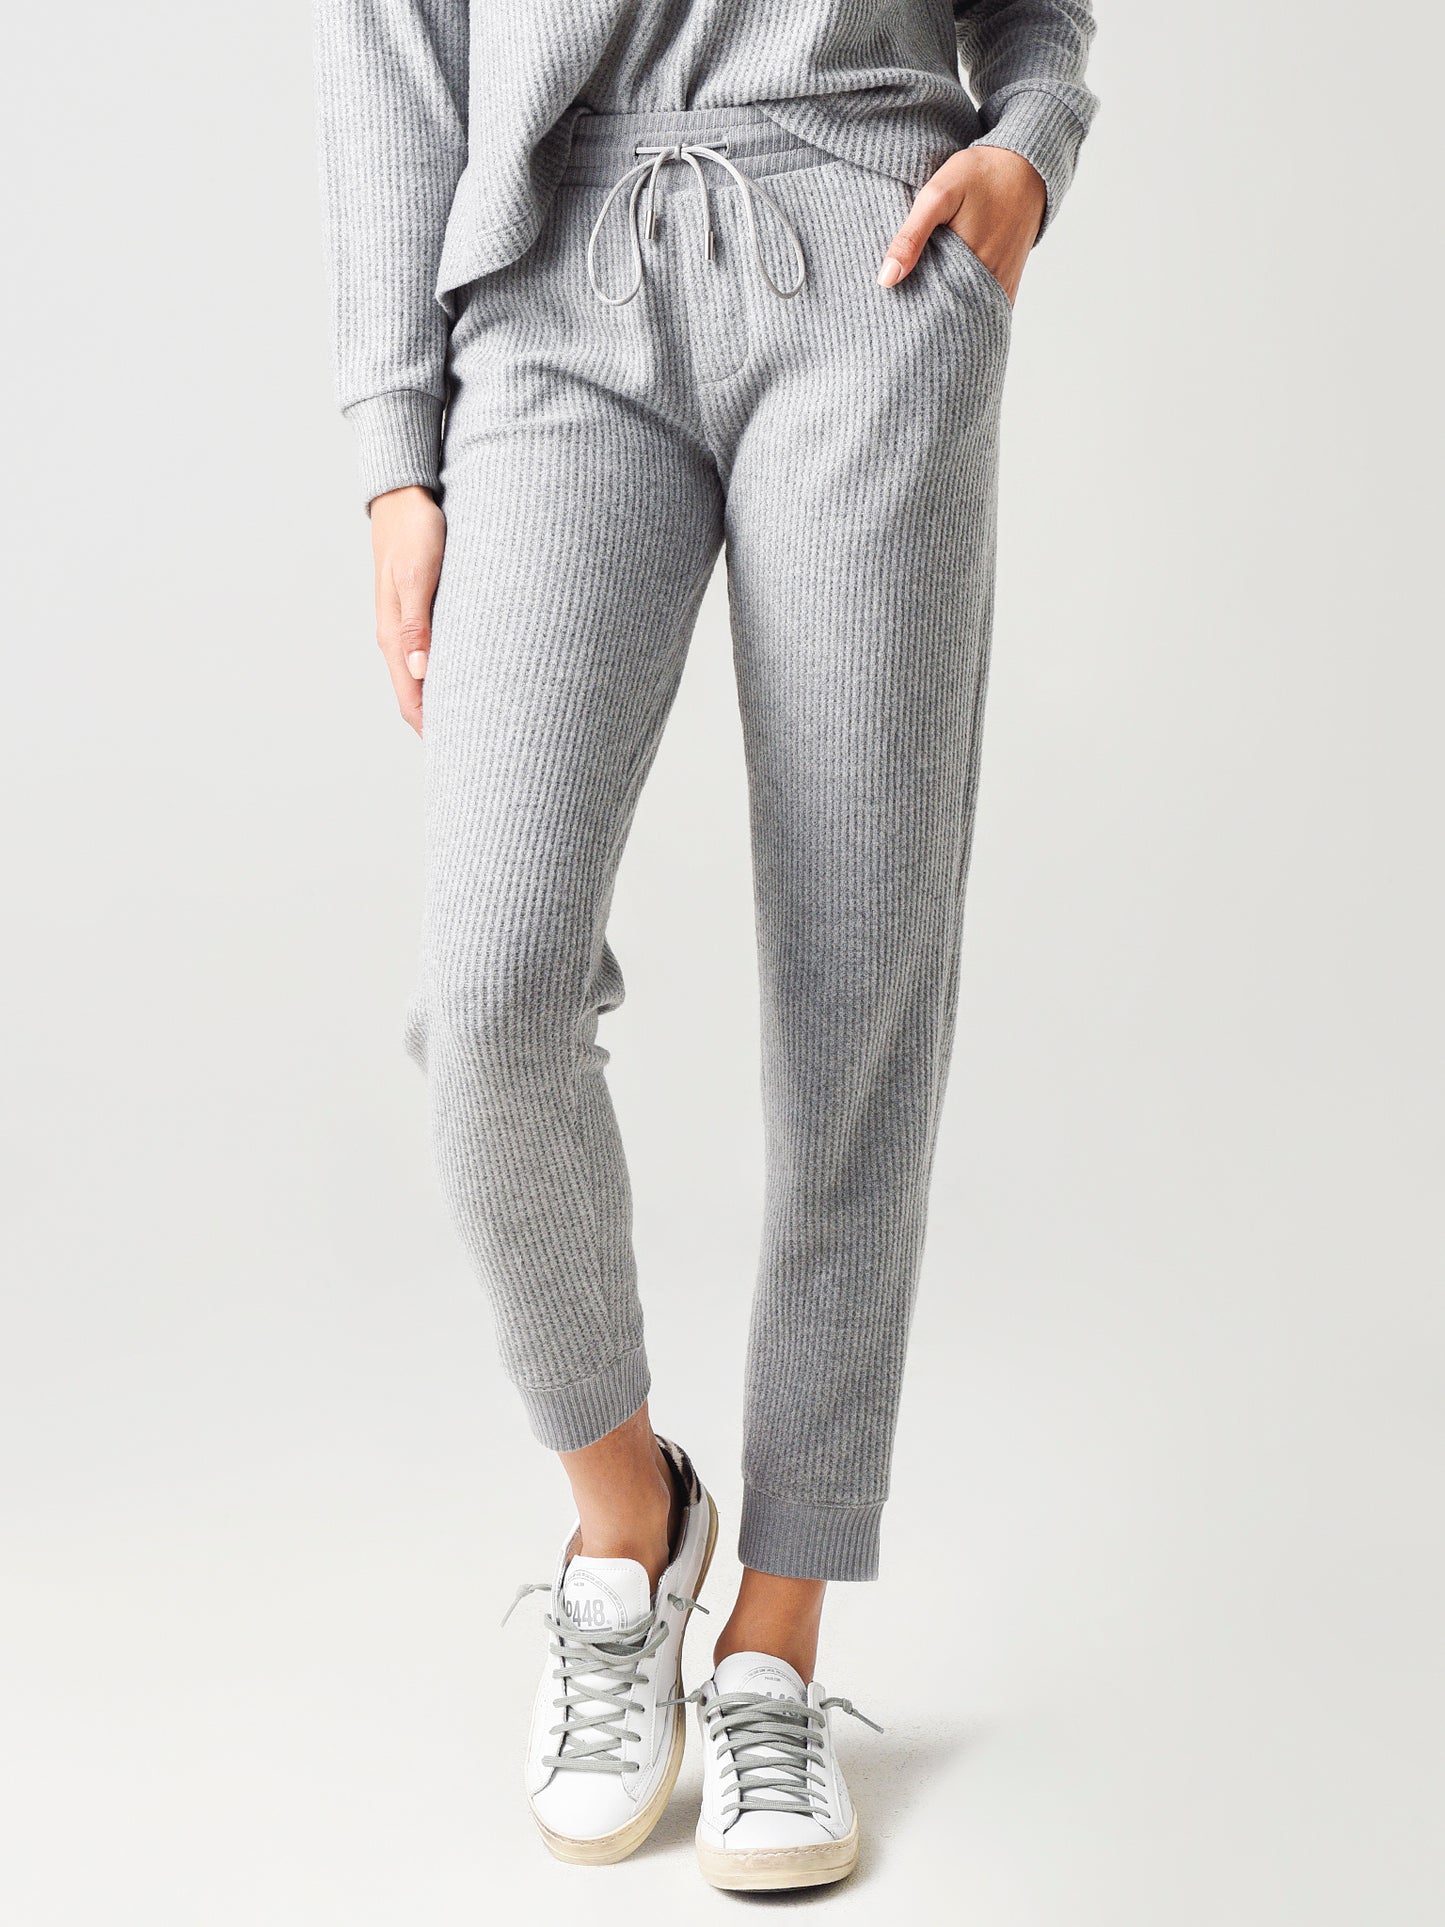 ATM Women's Waffle Pull-On Pant